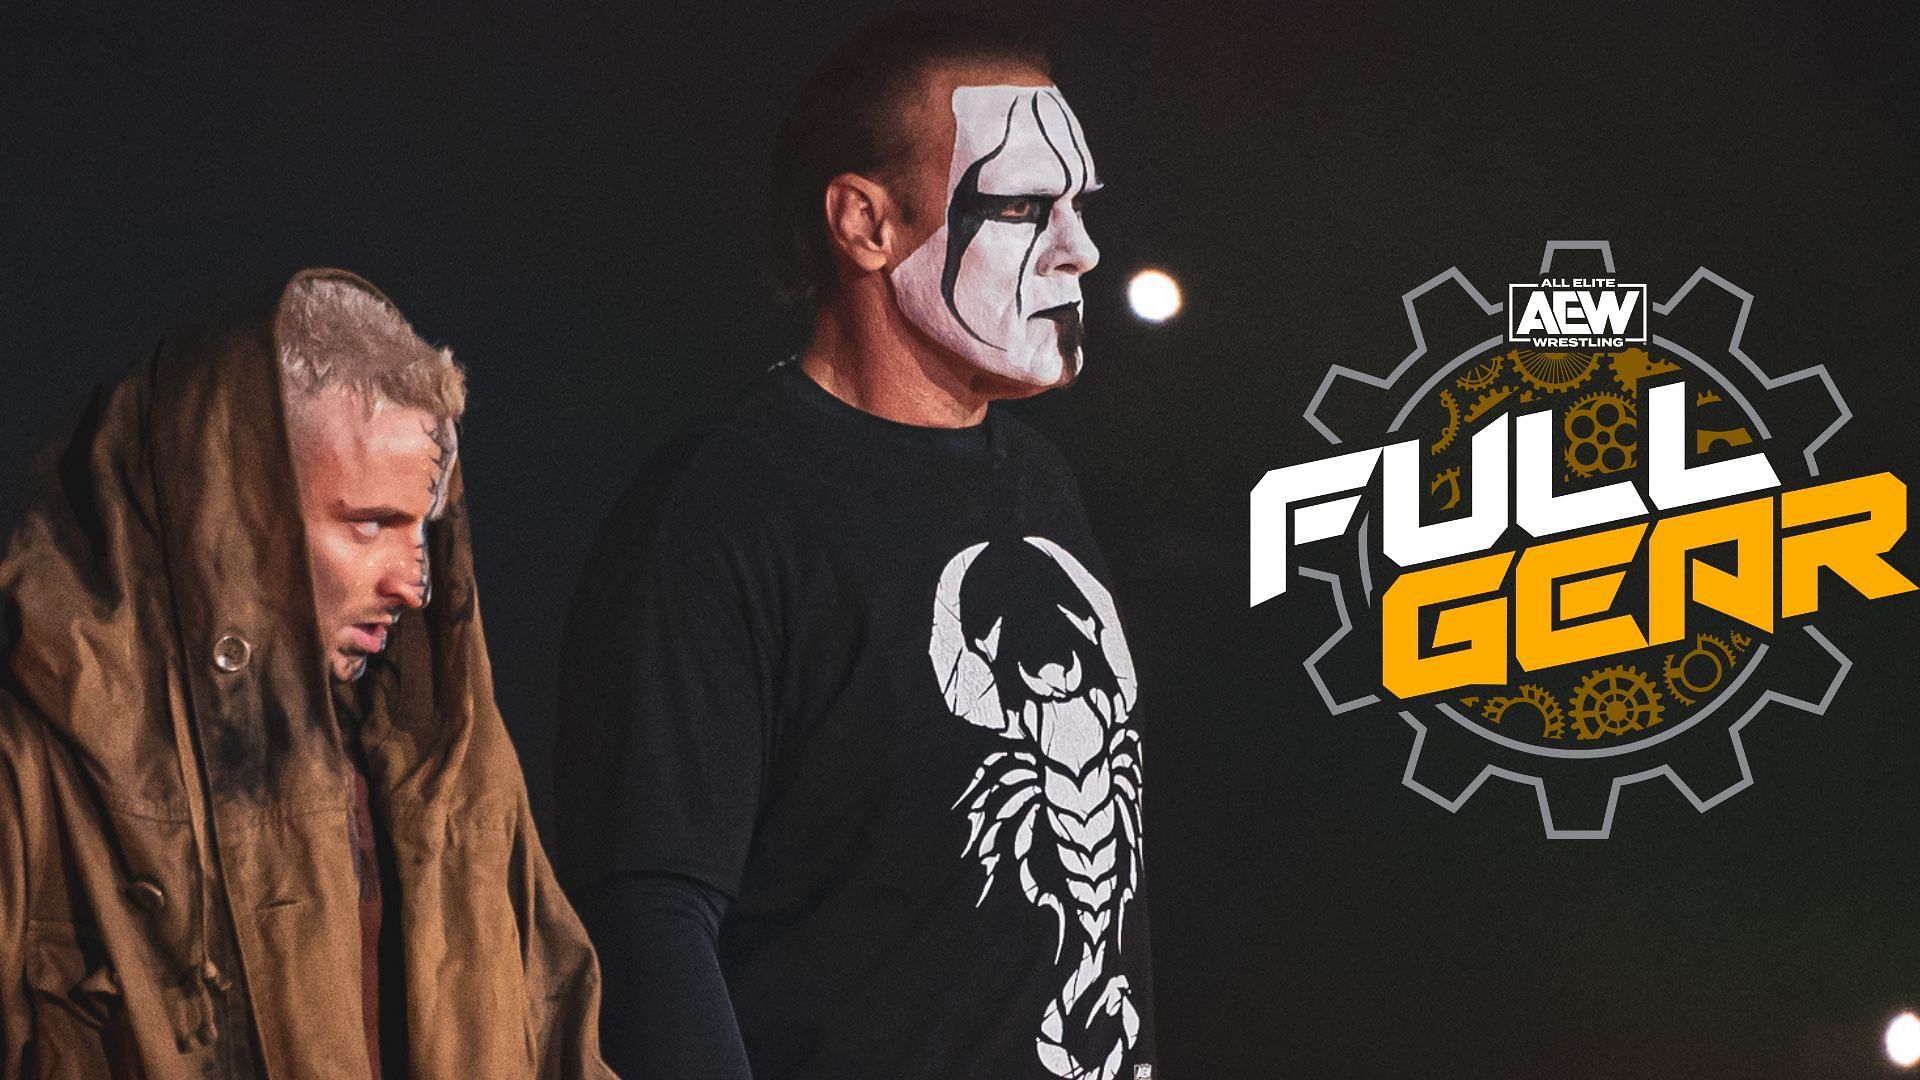 Could a WWE legend team up with Sting and Darby Allin at AEW Full Gear?